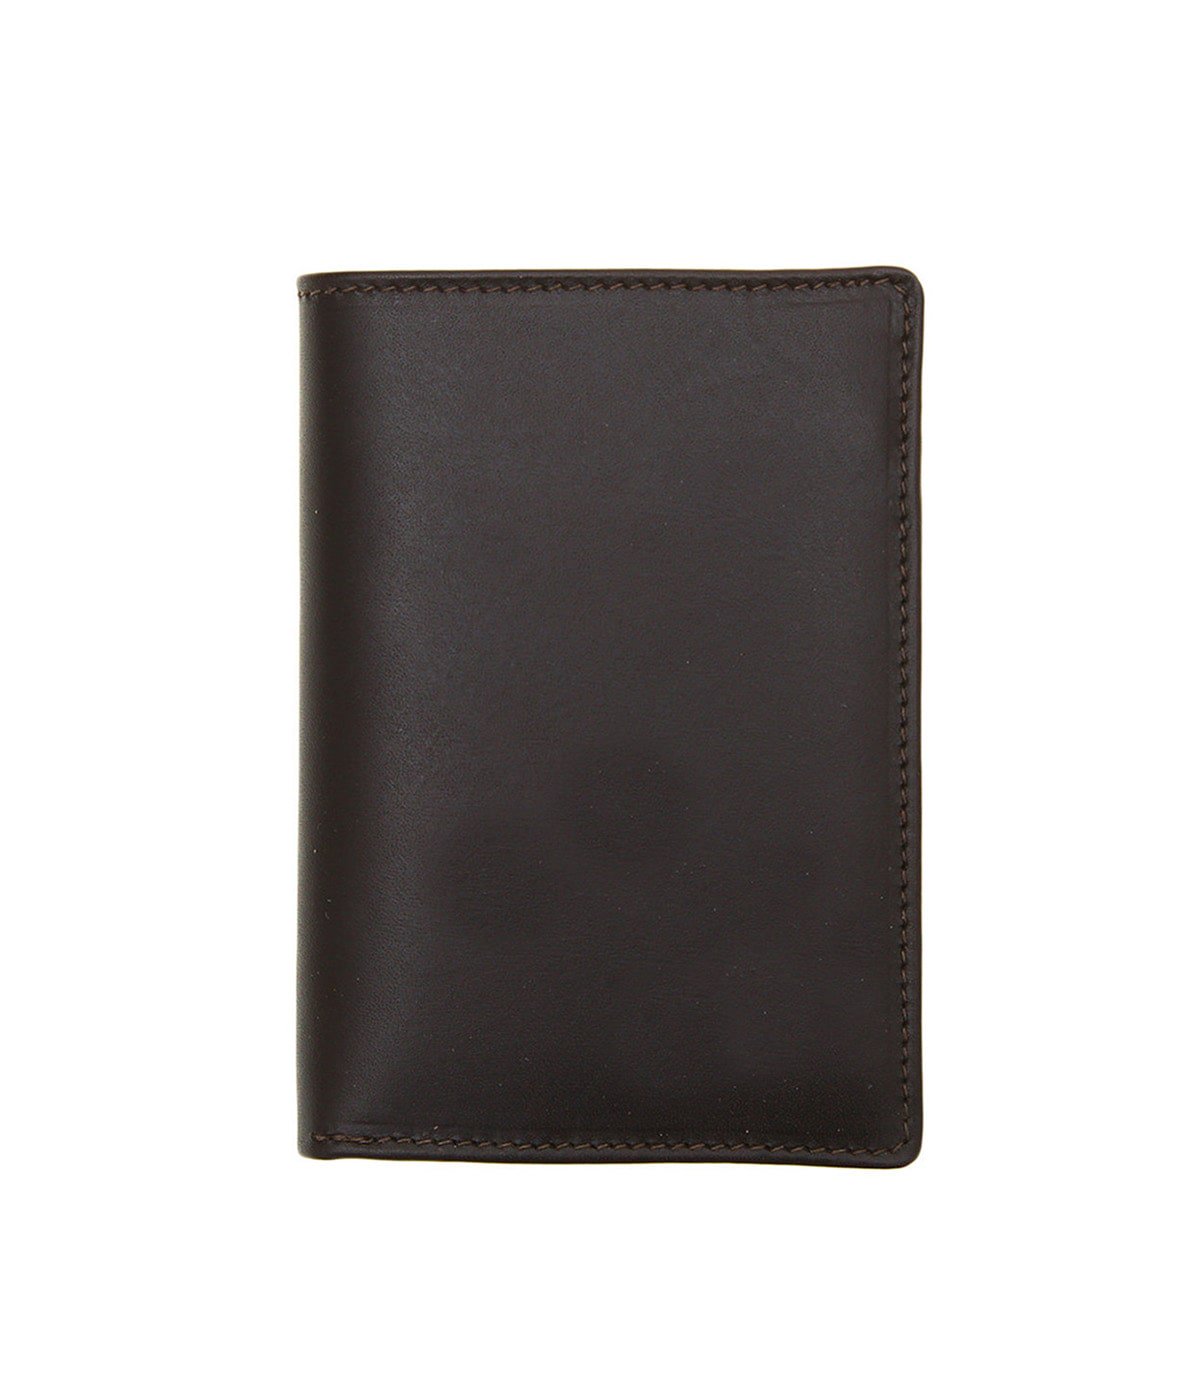 【ONLY ARK】別注 COMPACT WALLET